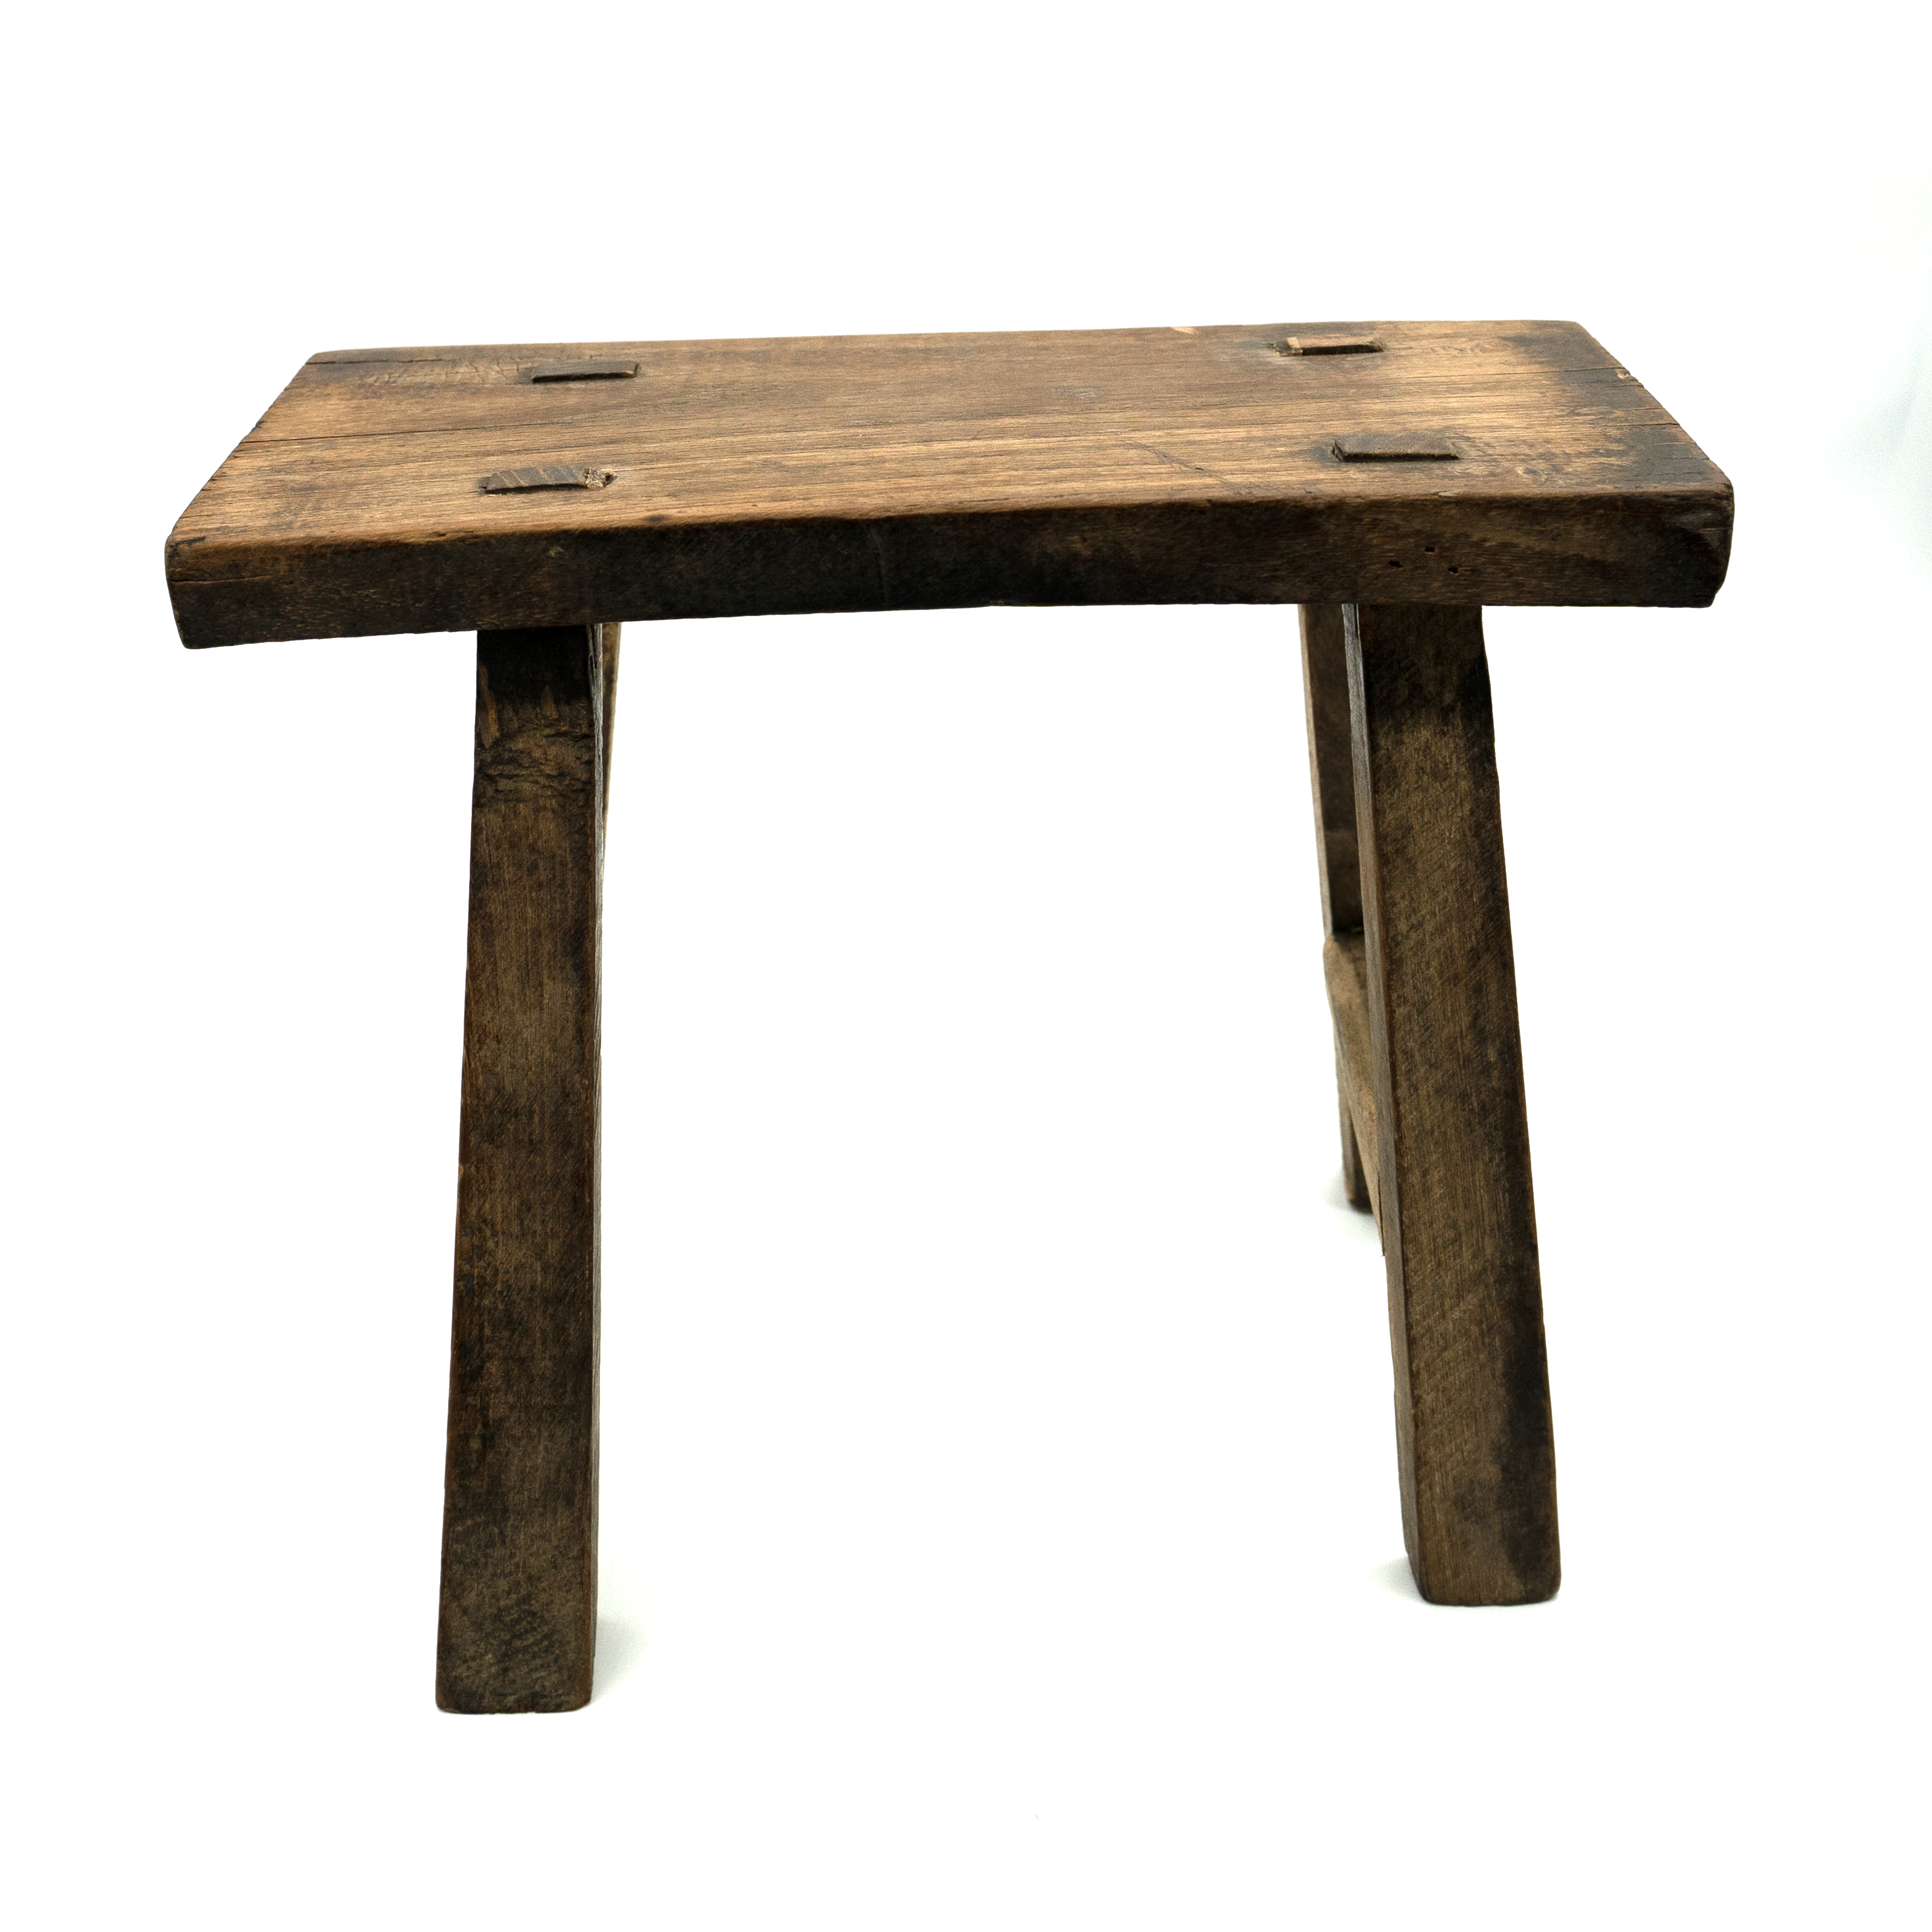 Vintage Milking Stool - Home Inspired | Unique And Curated Home Interior Designed Products